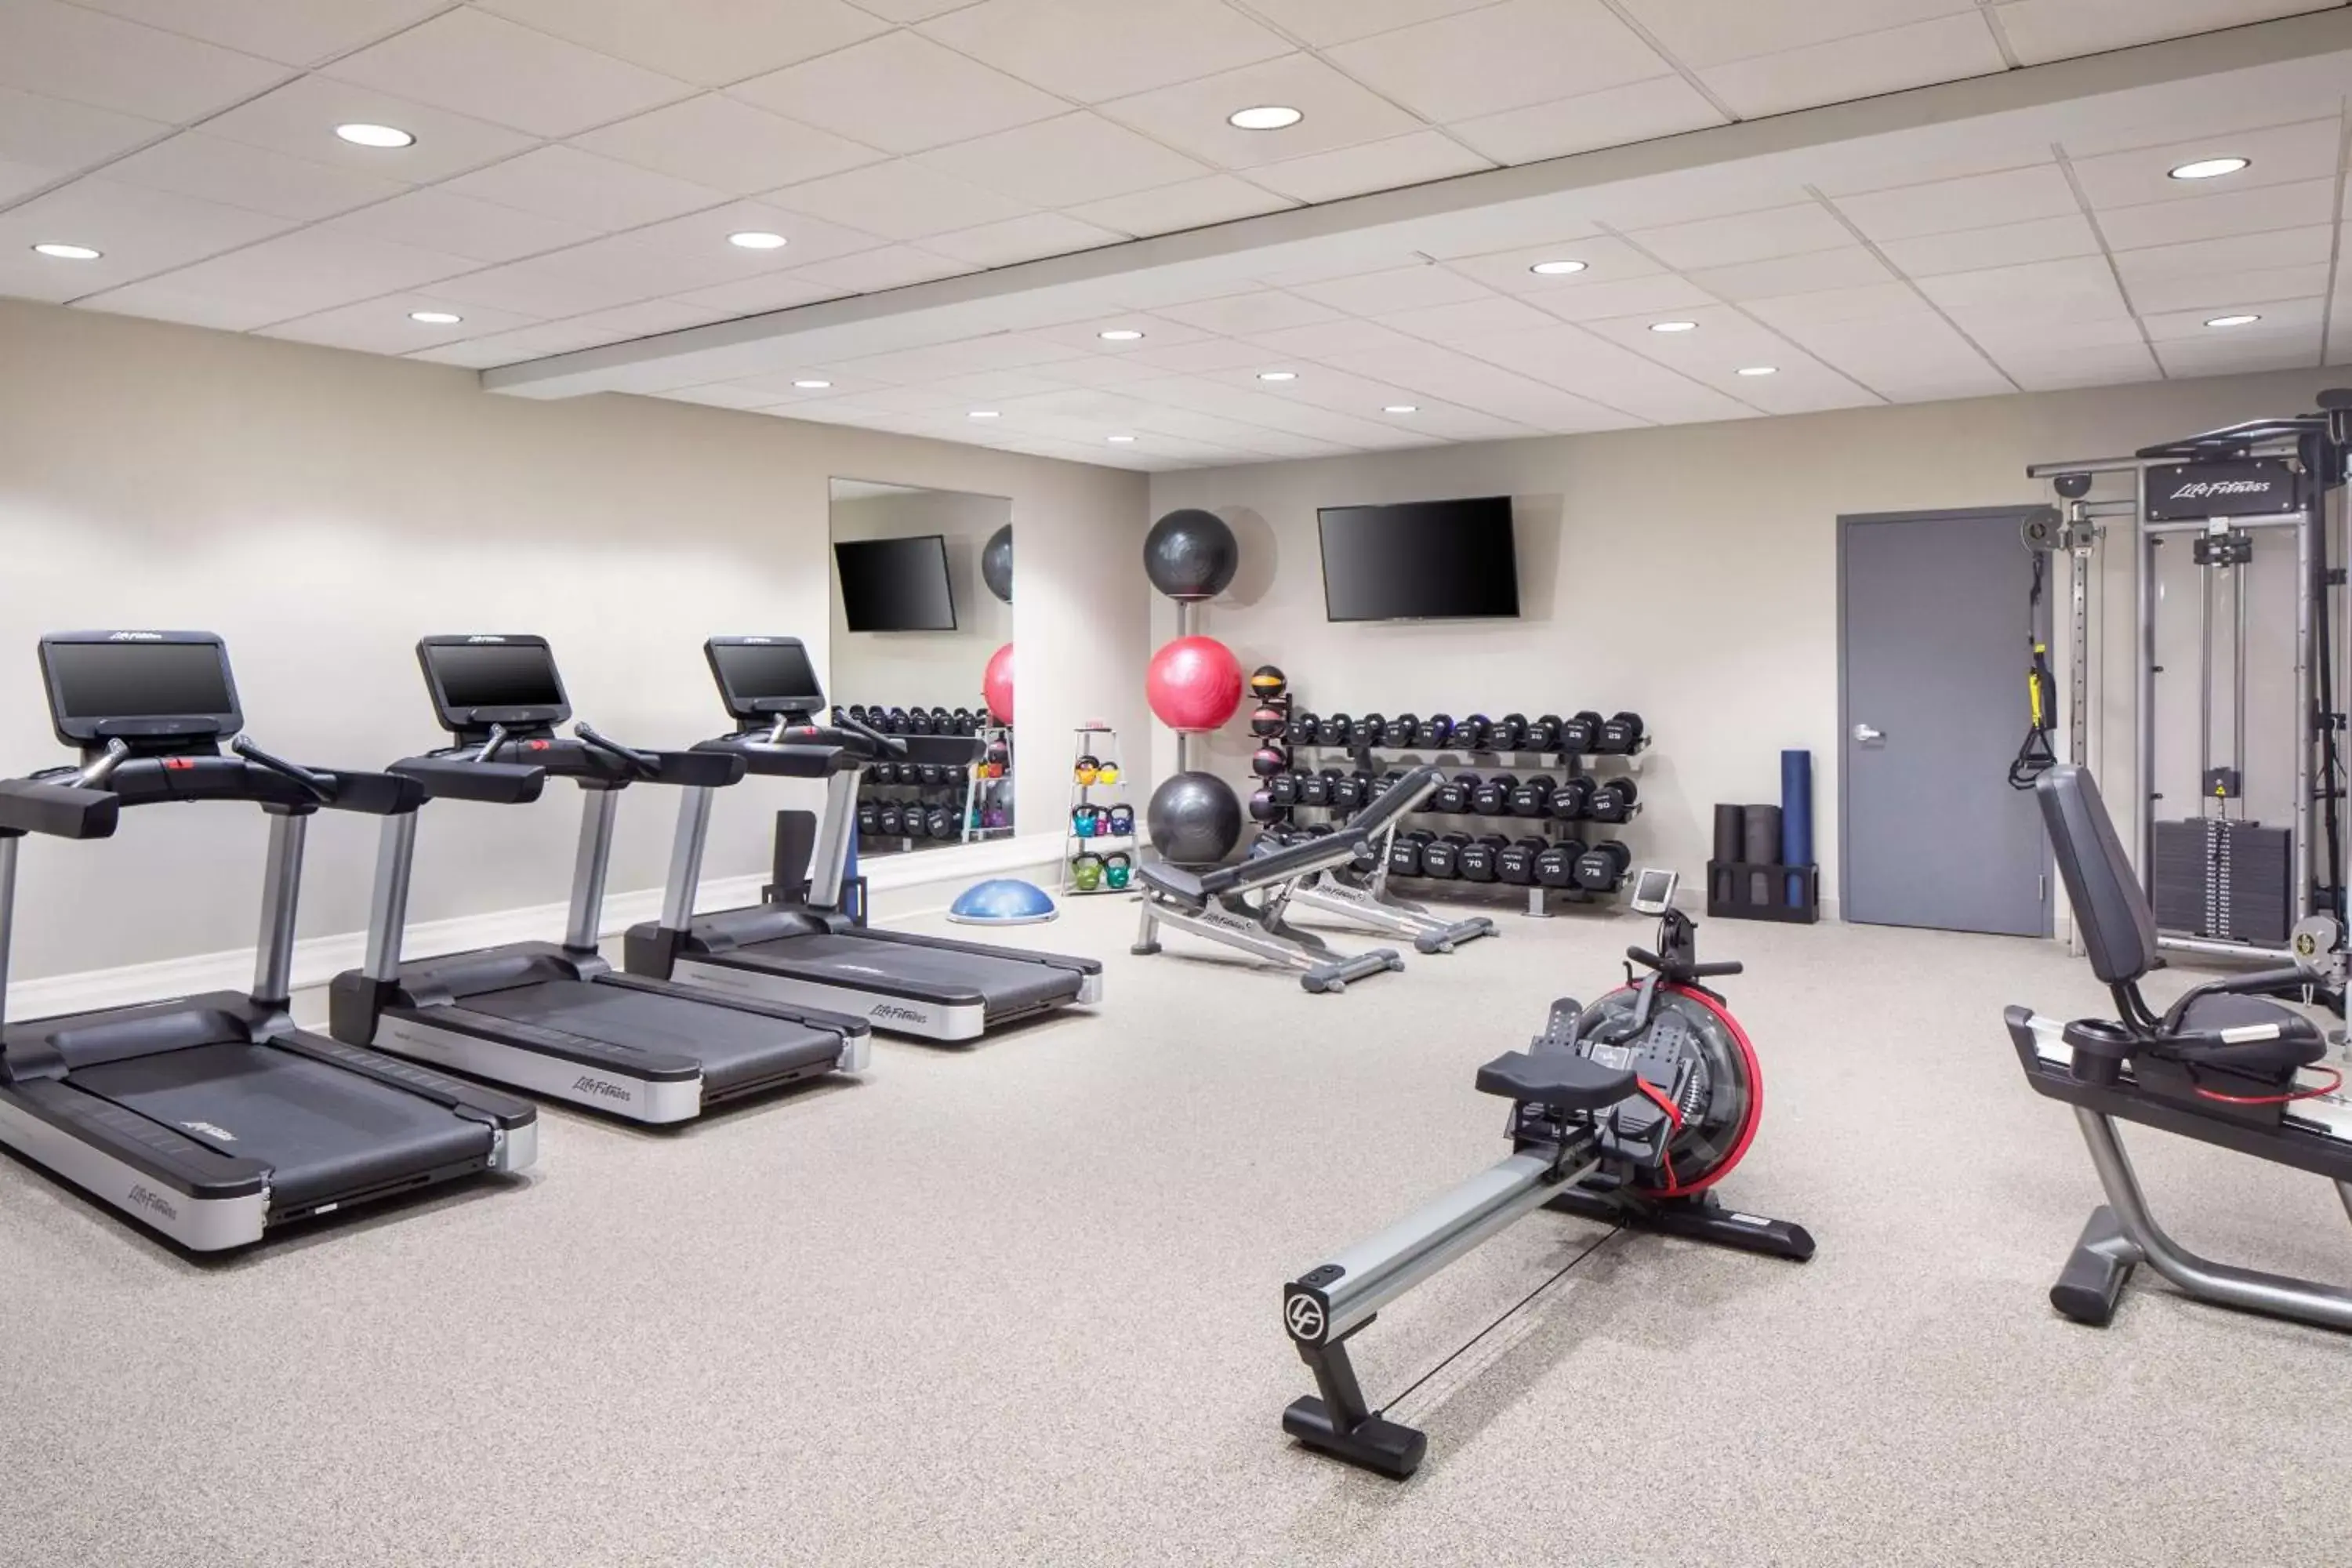 Fitness centre/facilities, Fitness Center/Facilities in DoubleTree by Hilton Ann Arbor, MI